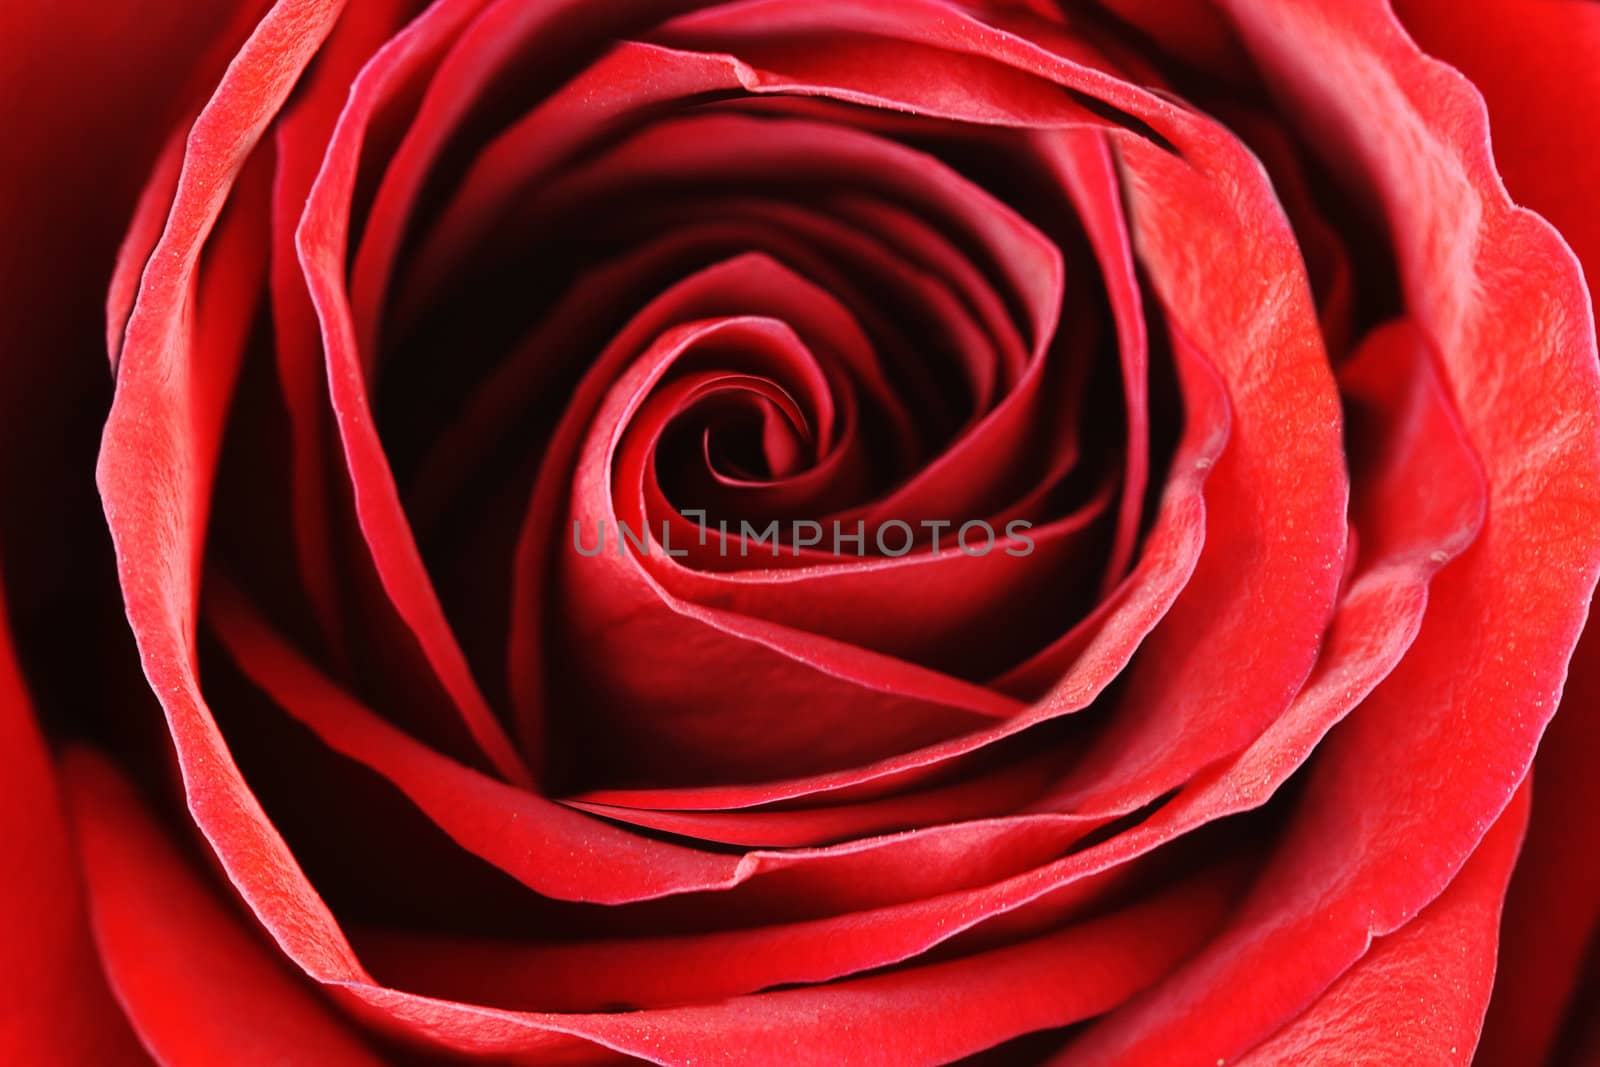 Macro of a beautiful red rose unfurling its petals. Extreme shallow DOF.